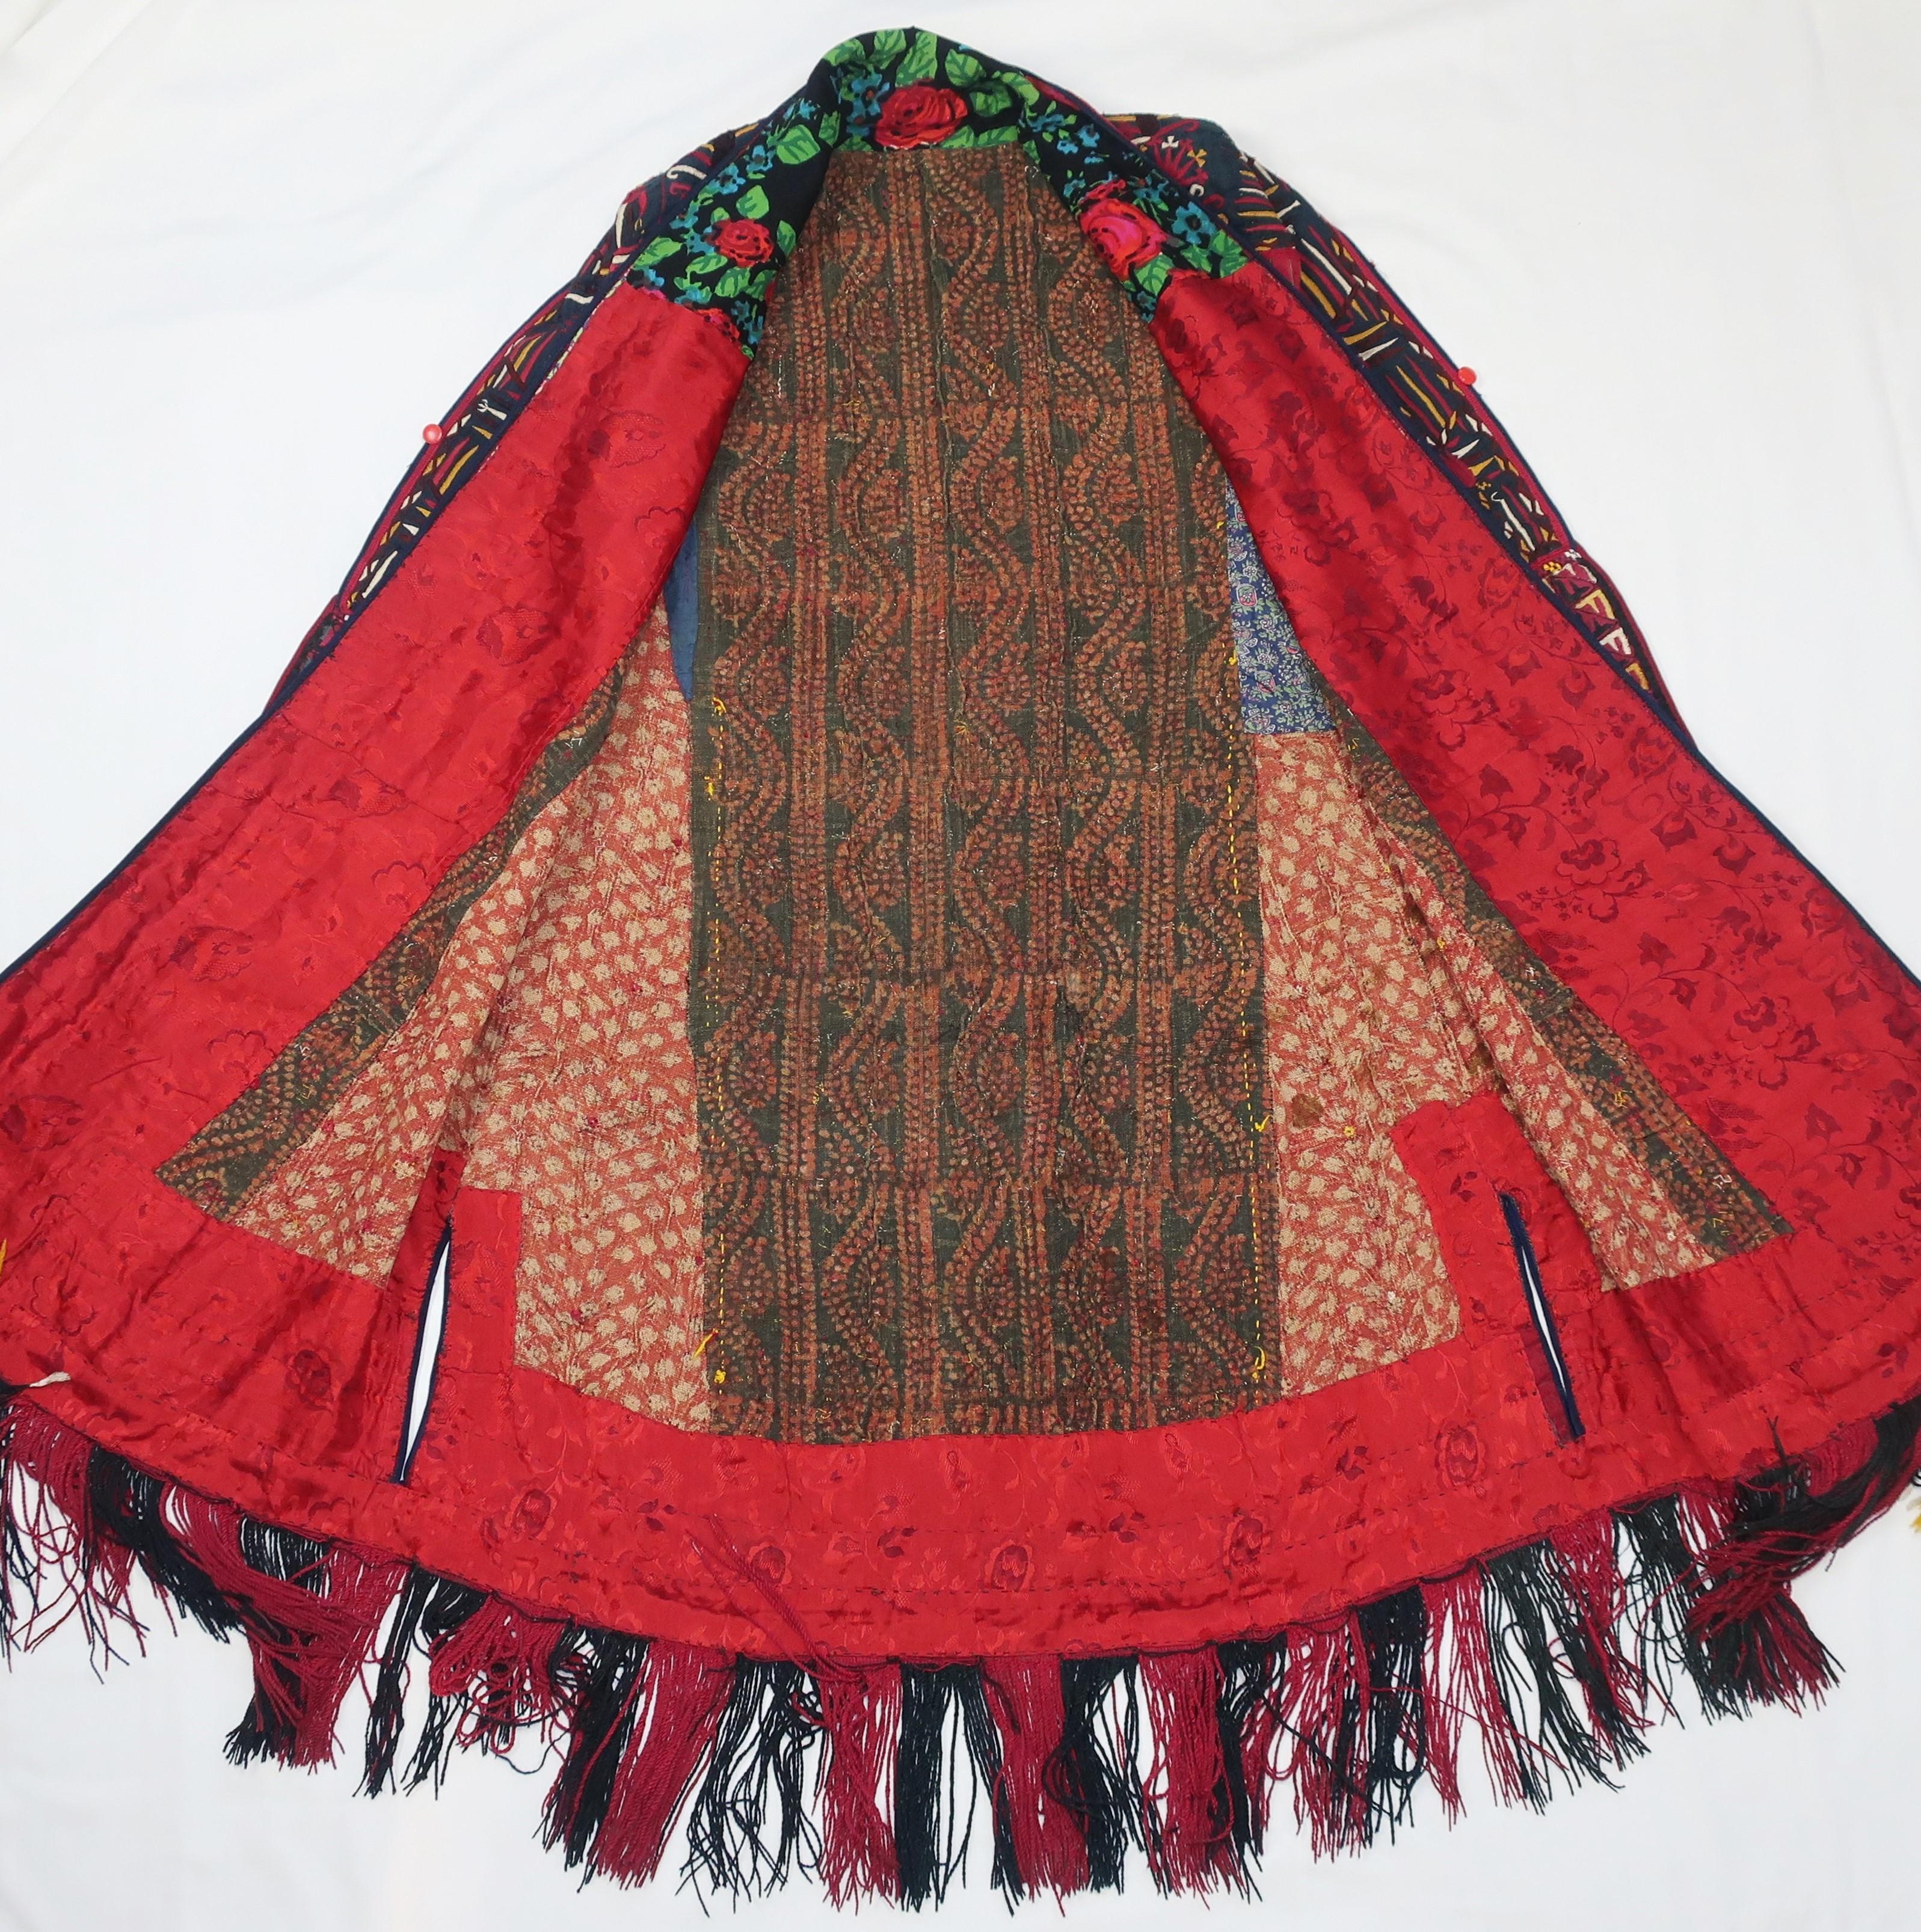 19th Century Central Asian Embroidered Chyrpy Mantle Cloak For Sale 6